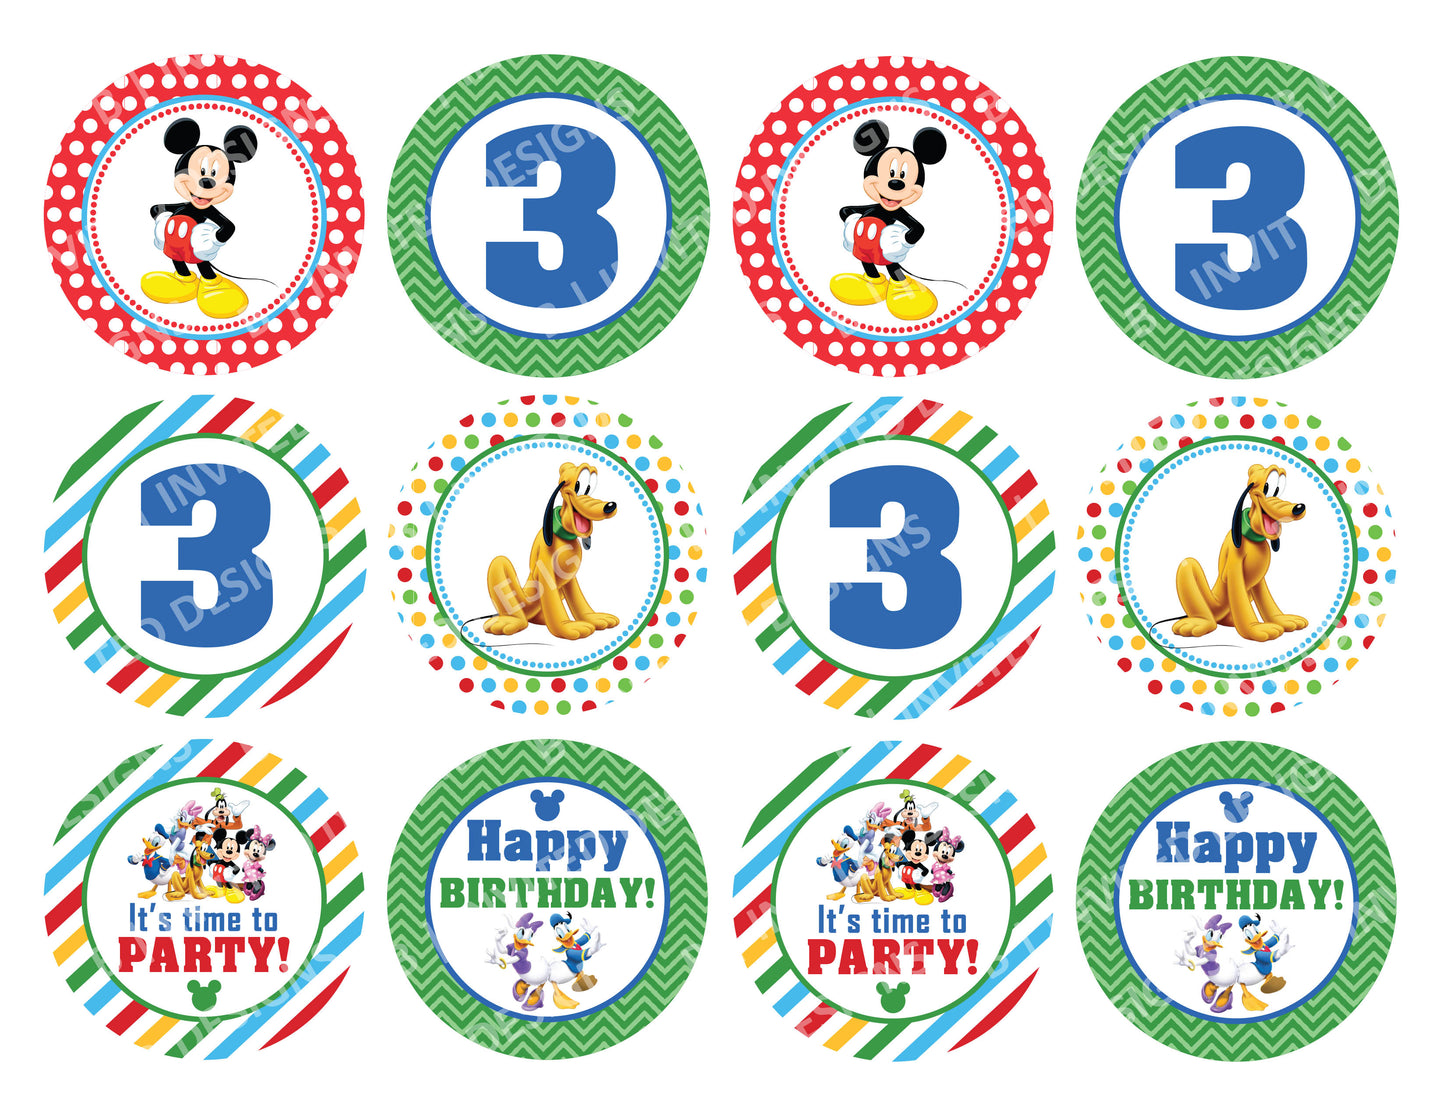 MICKEY MOUSE Red Polka-dot Cupcake Toppers! 2 Inch or 2.5 Inch! Digital OR Printed & Fully Assembled!